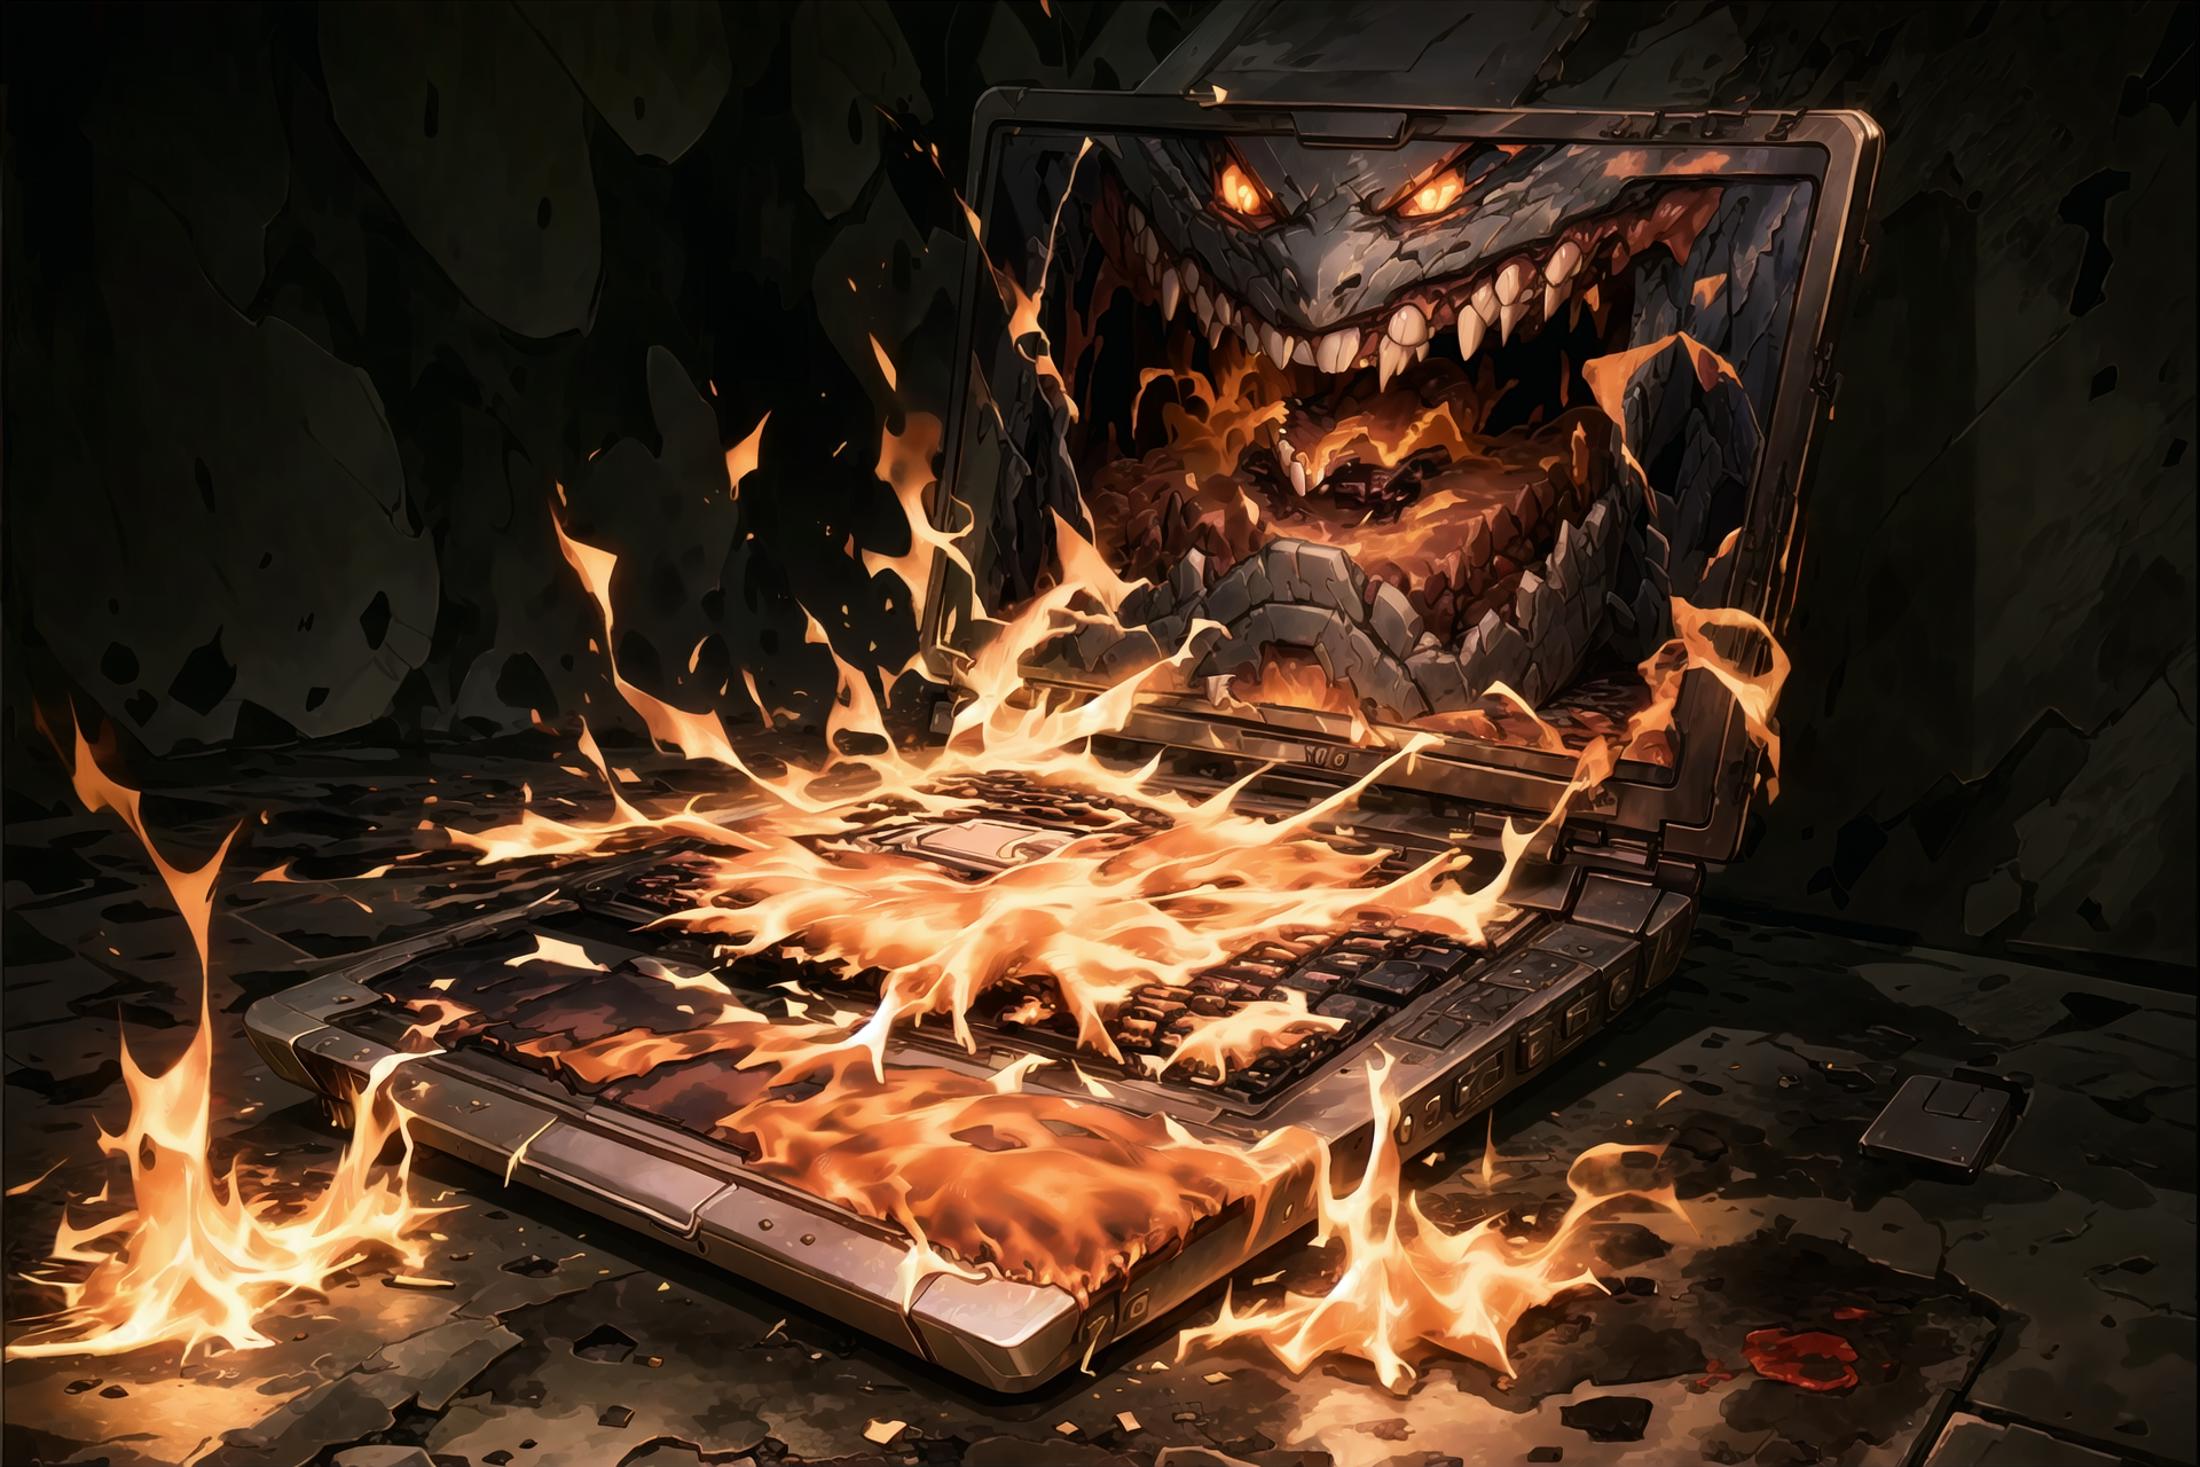 burning labtop image by penguinnes